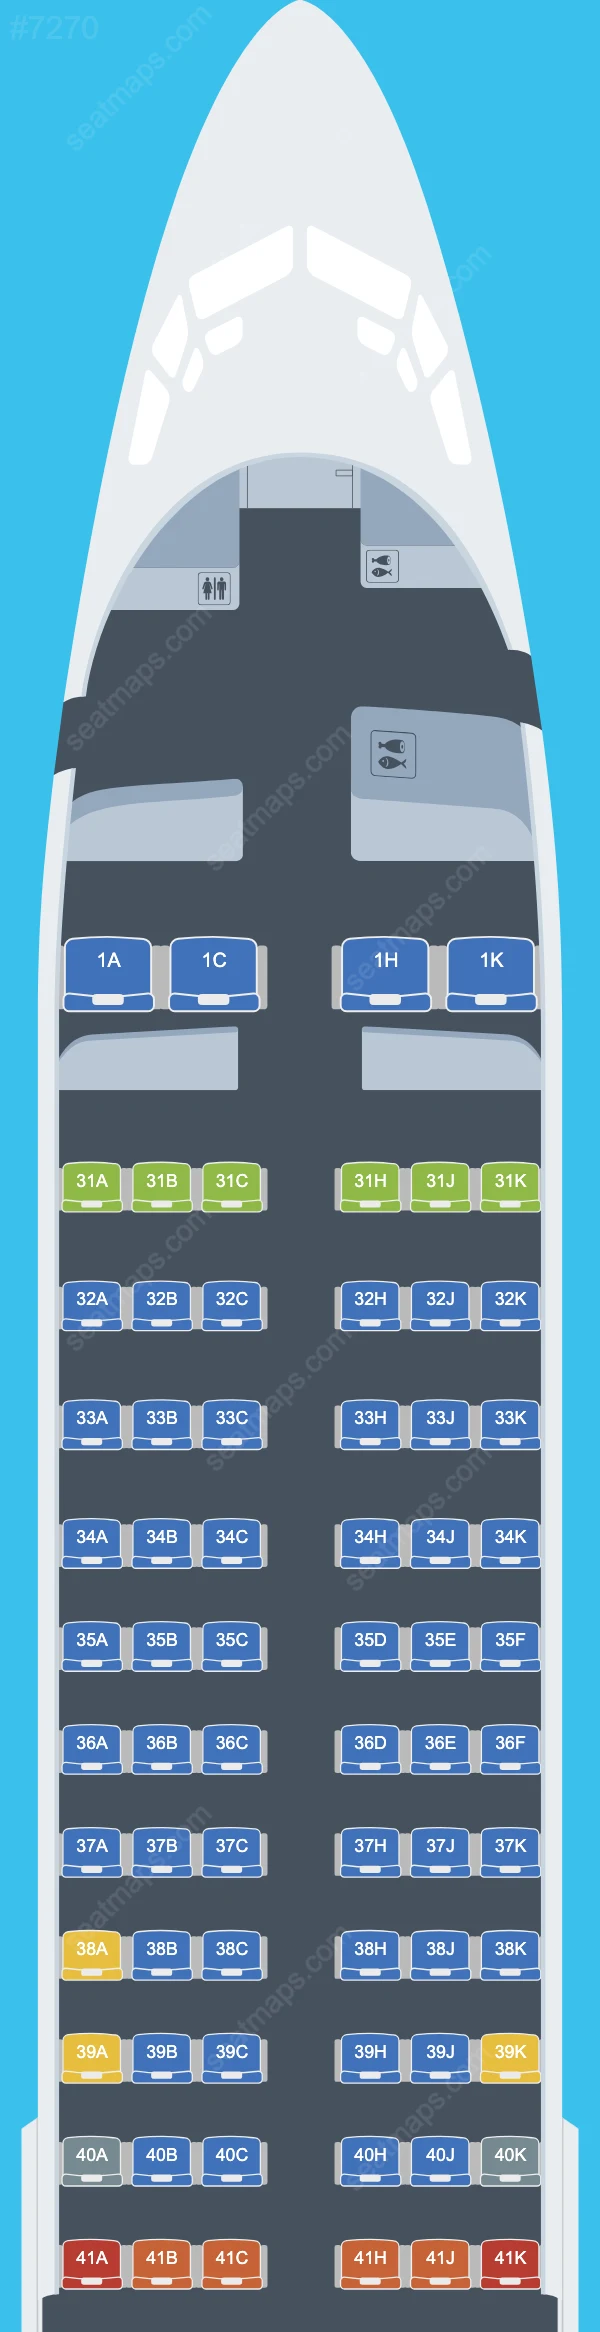 China Southern Boeing 737 Seat Maps 737-800 V.8